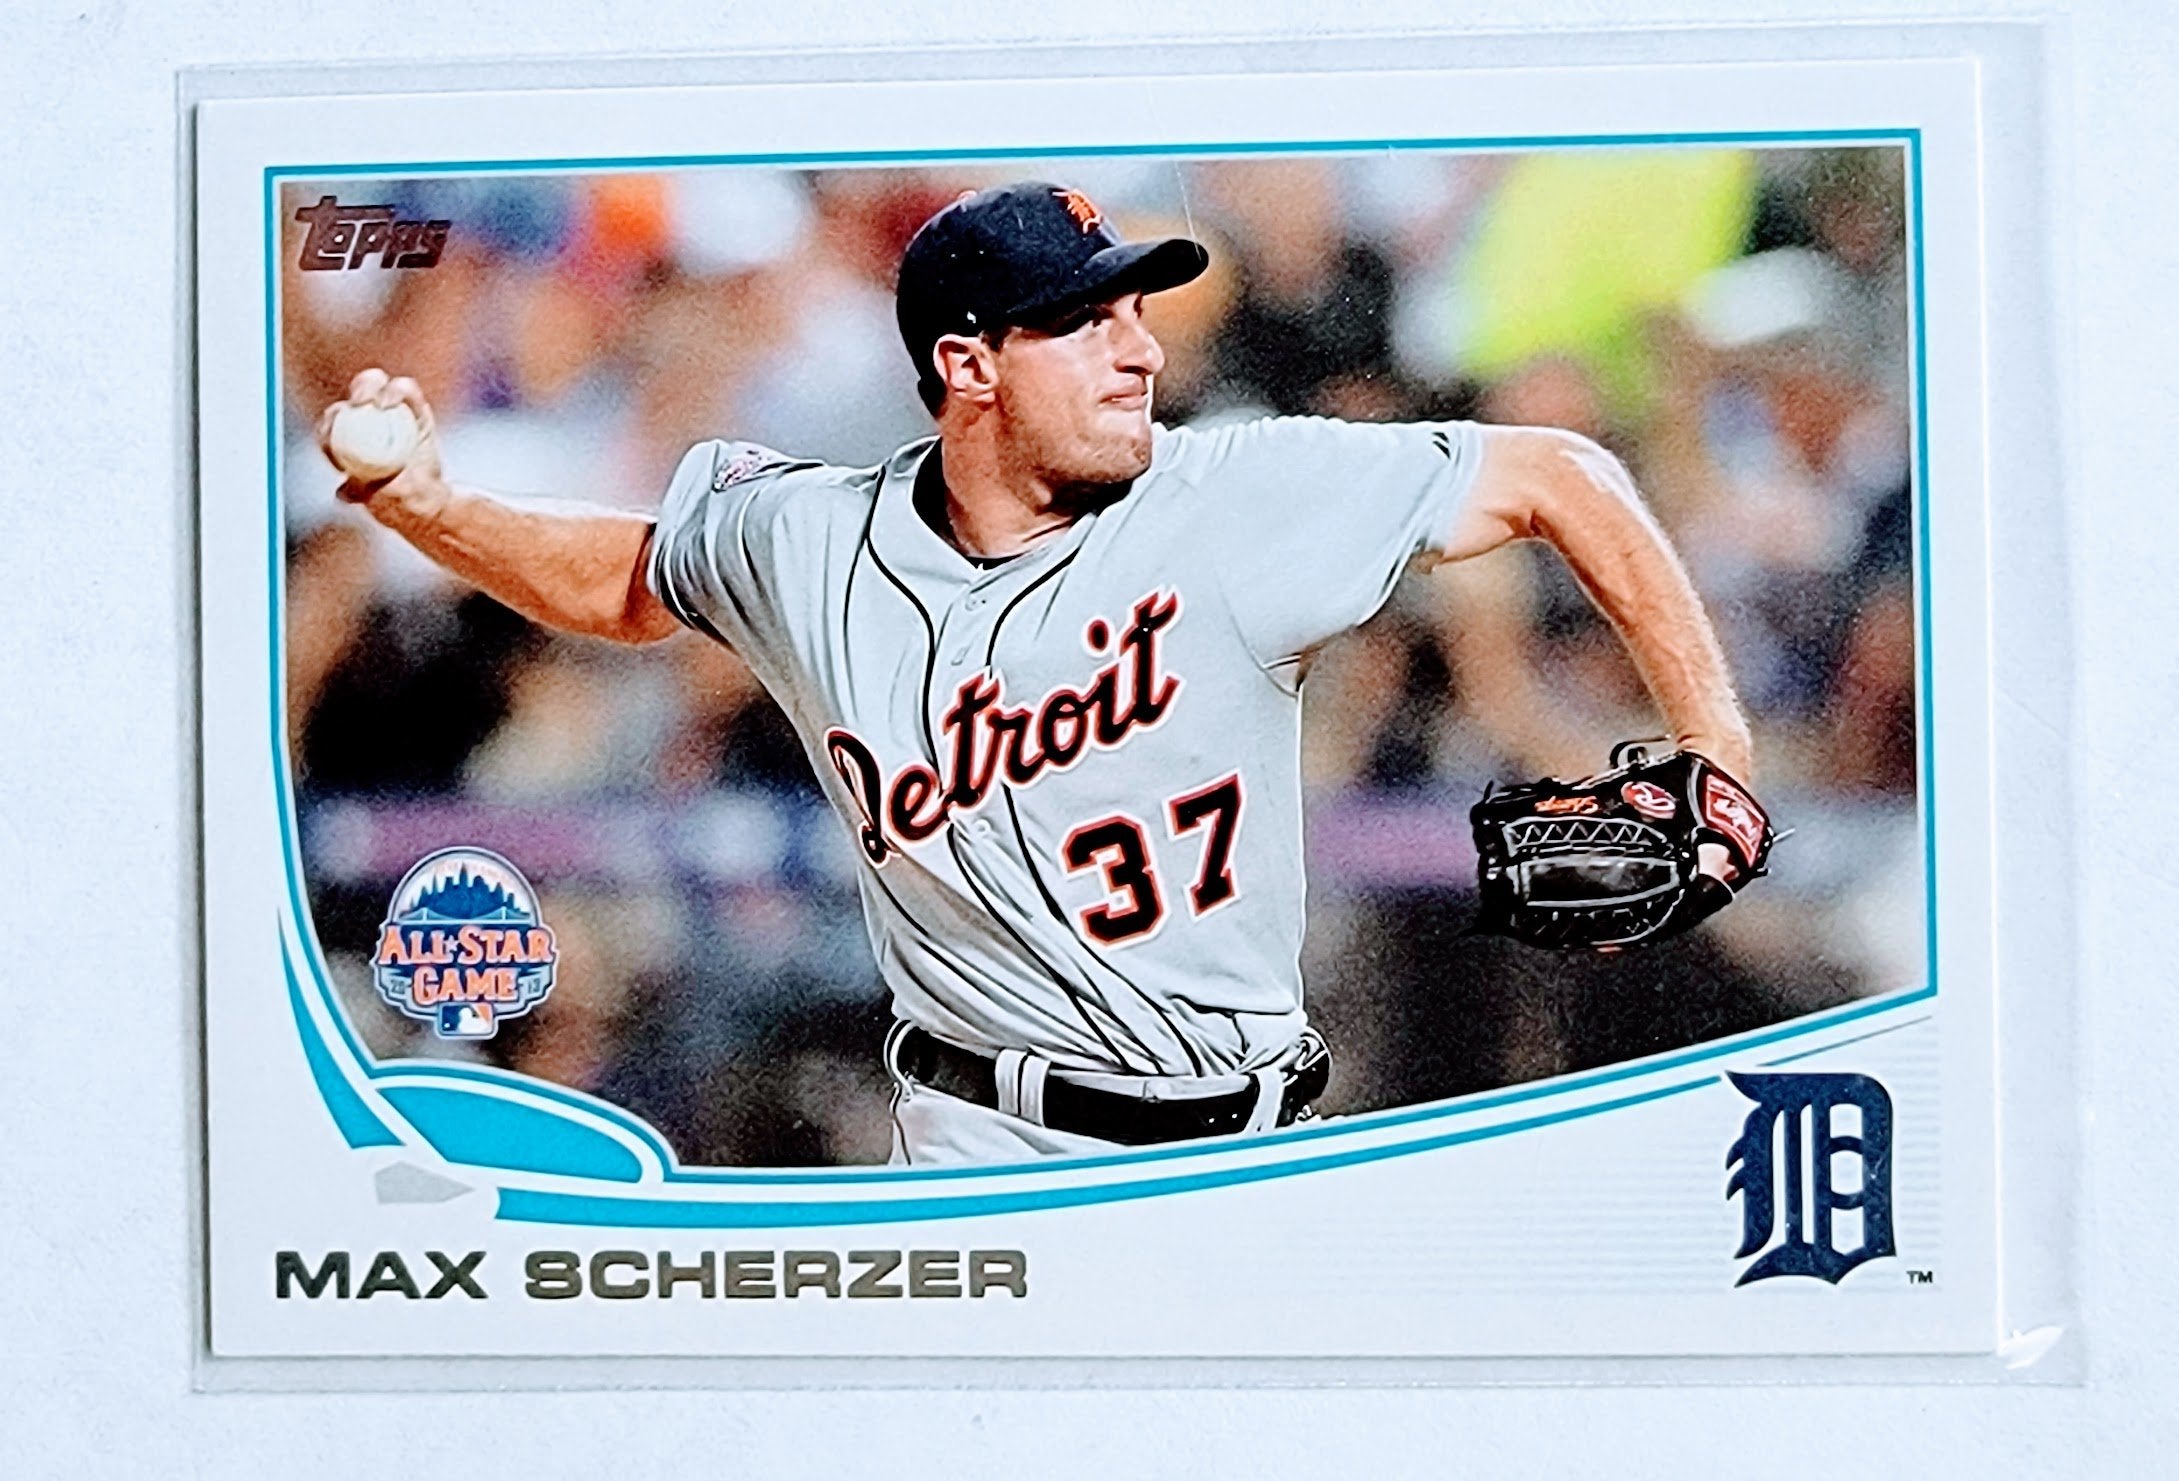 2013 Topps Max Scherzer All Star Game Baseball Card TPTV simple Xclusive Collectibles   